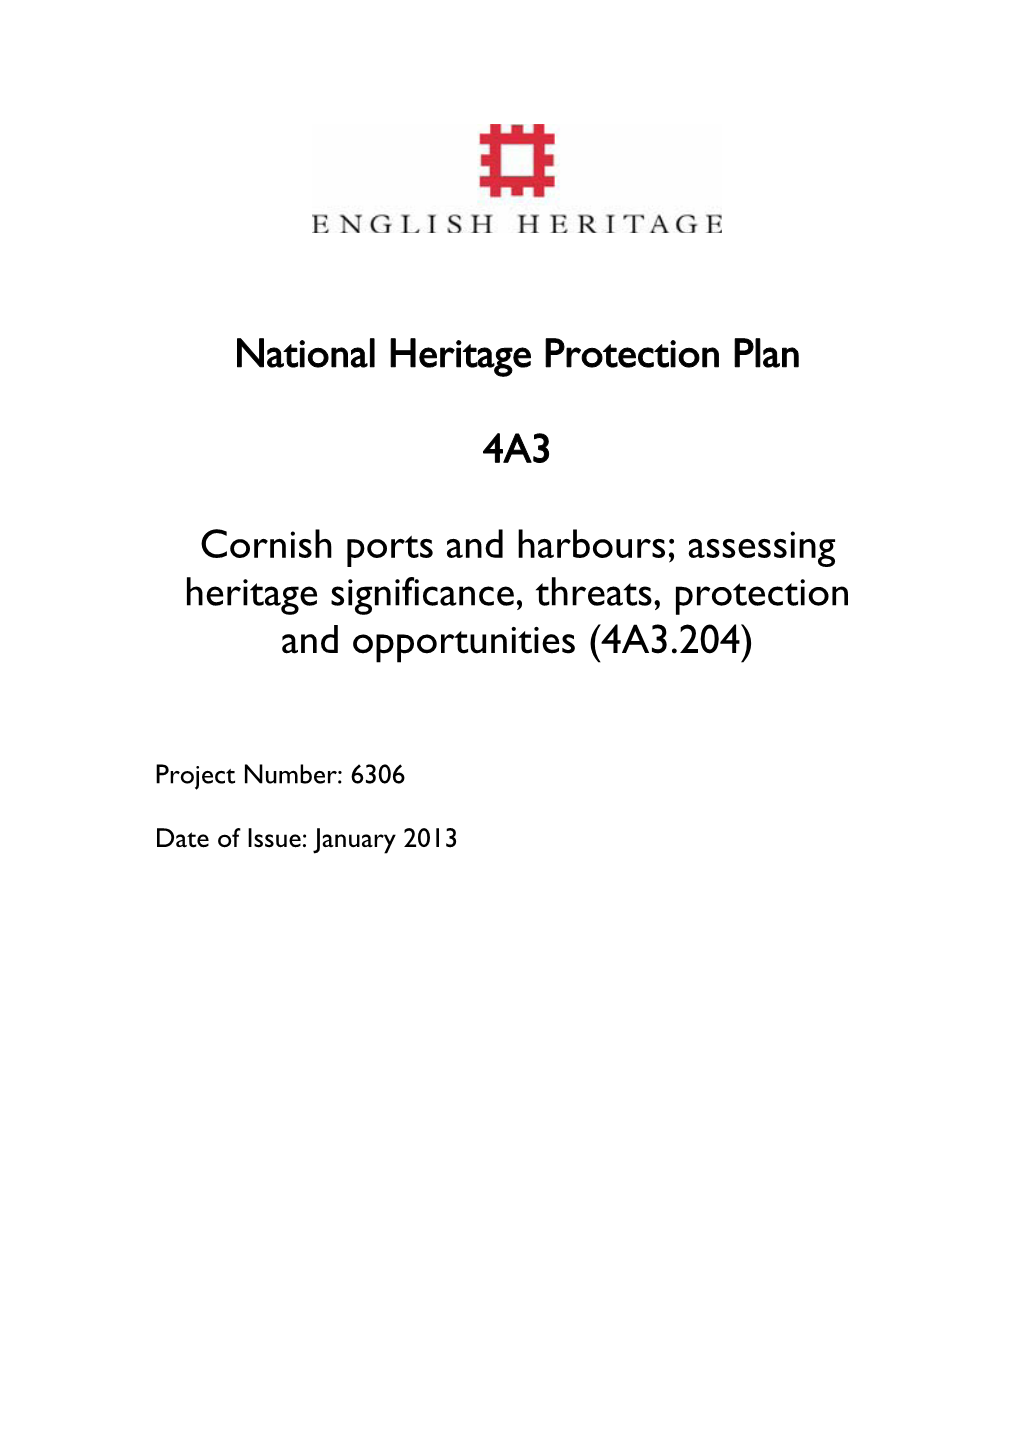 National Heritage Protection Plan 4A3 Cornish Ports and Harbours